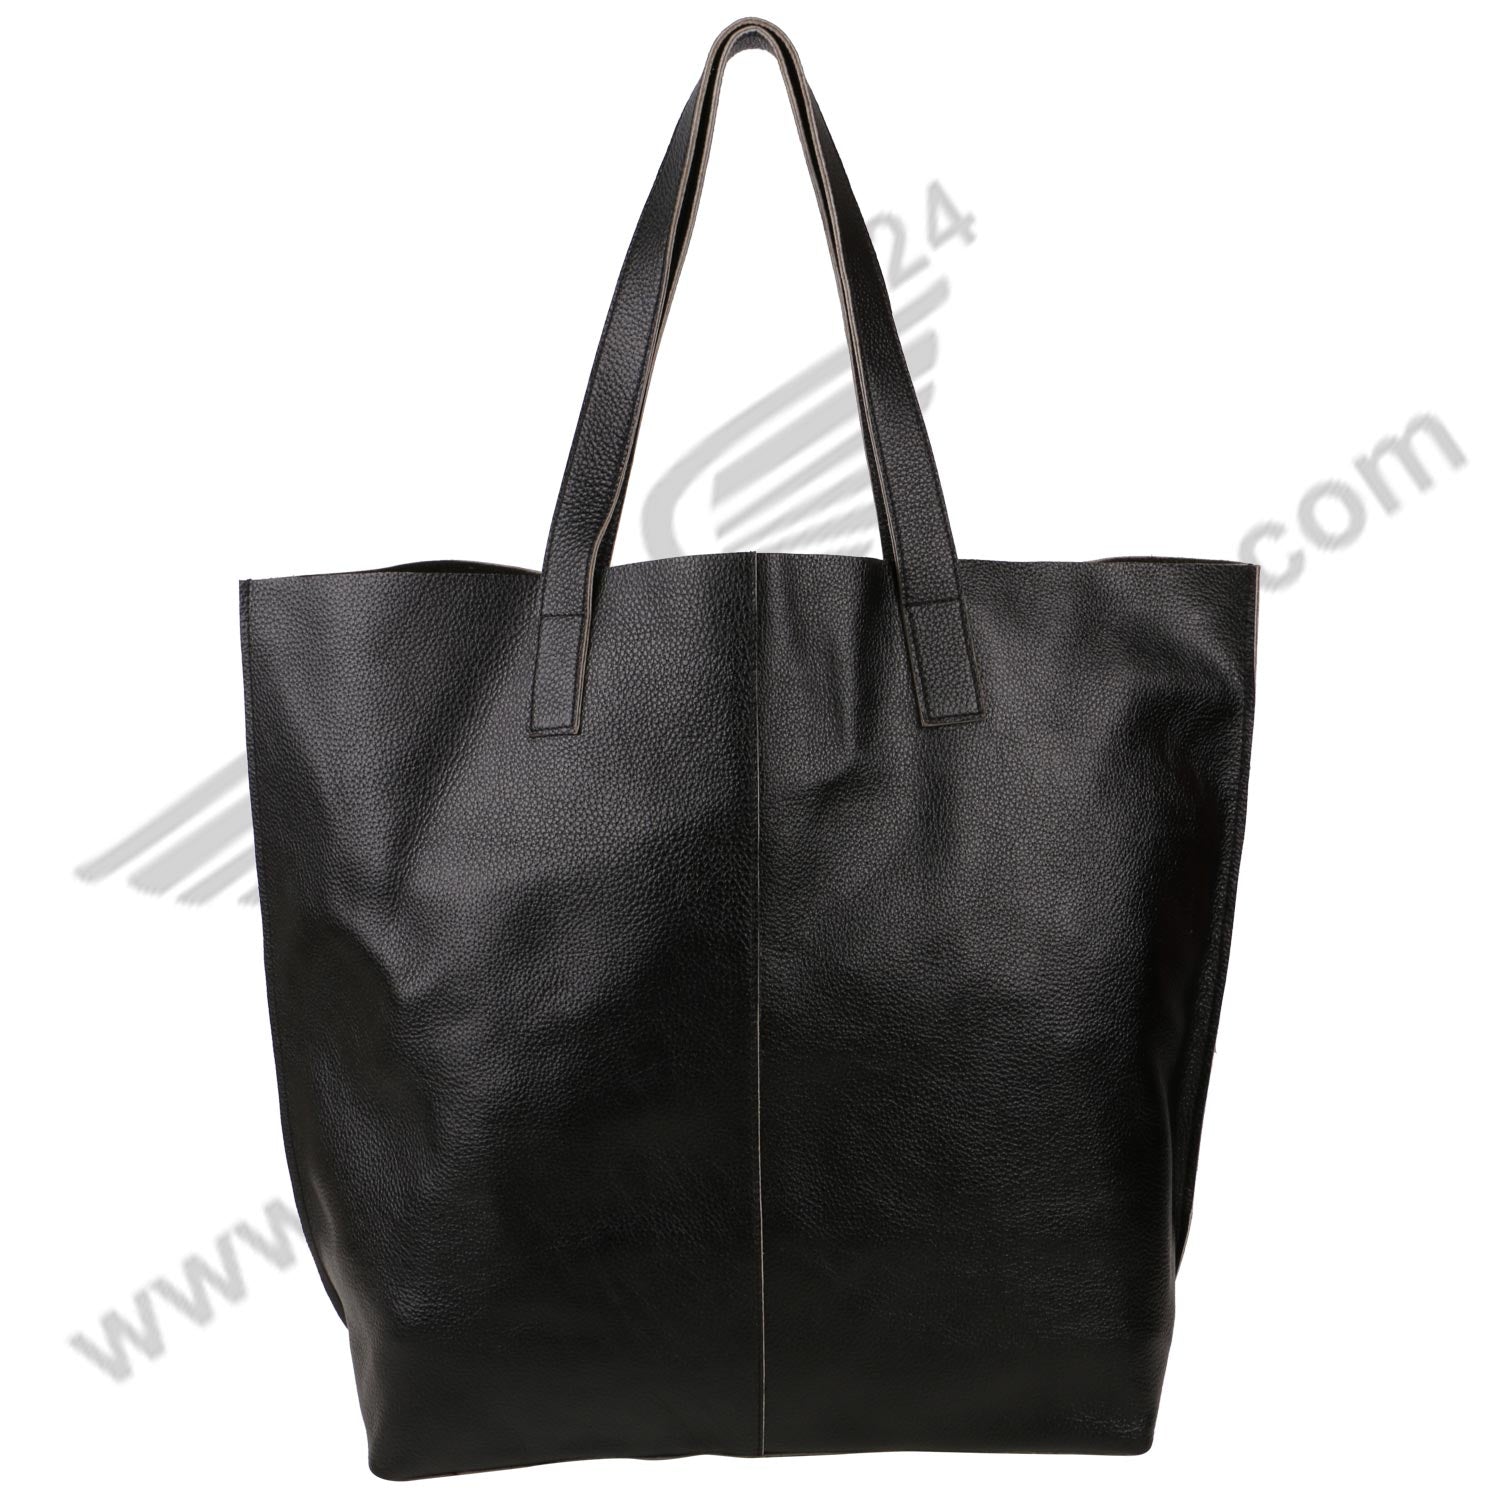 Front view of LUFT SHOPPING BAG. The handle of bag is visible